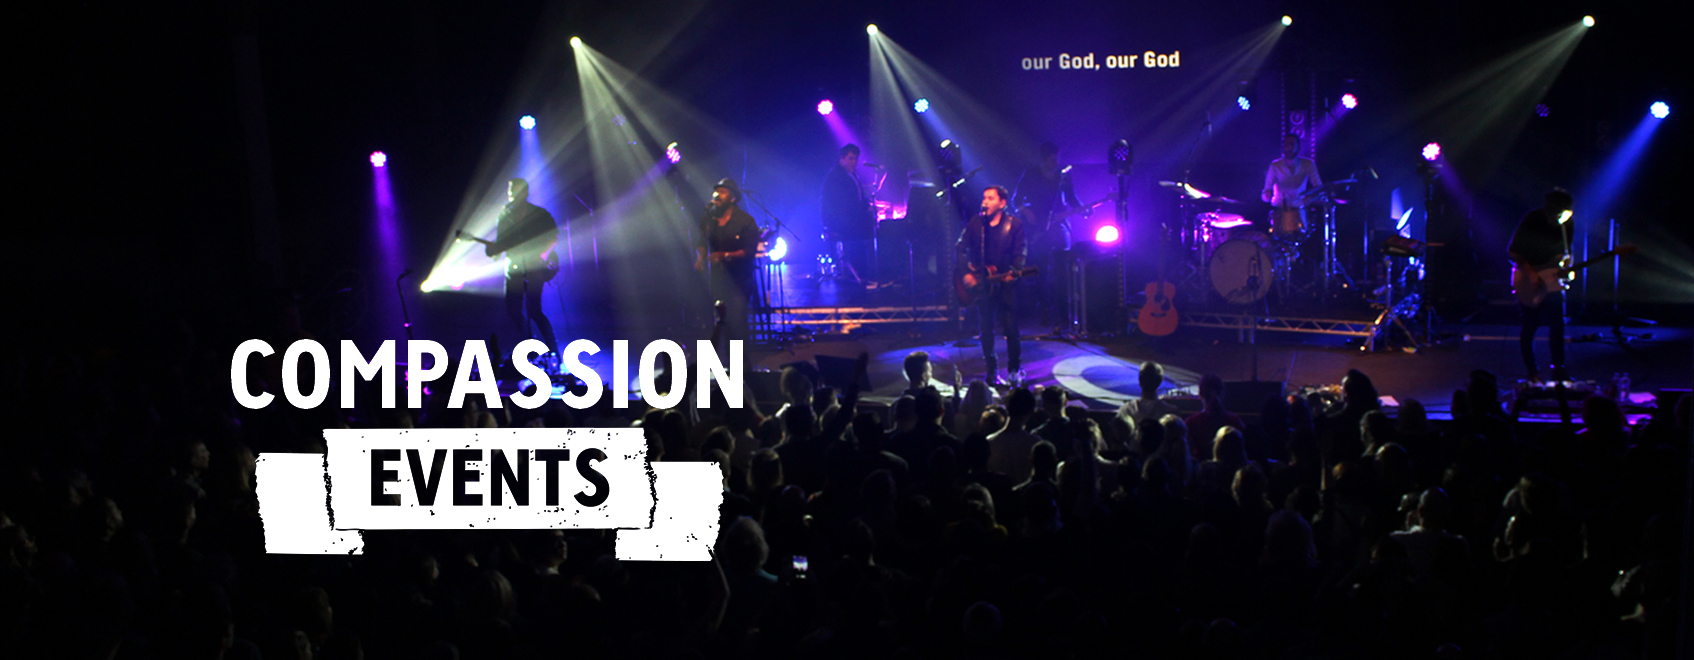 Christian Events Christian Concerts and Festivals Compassion UK